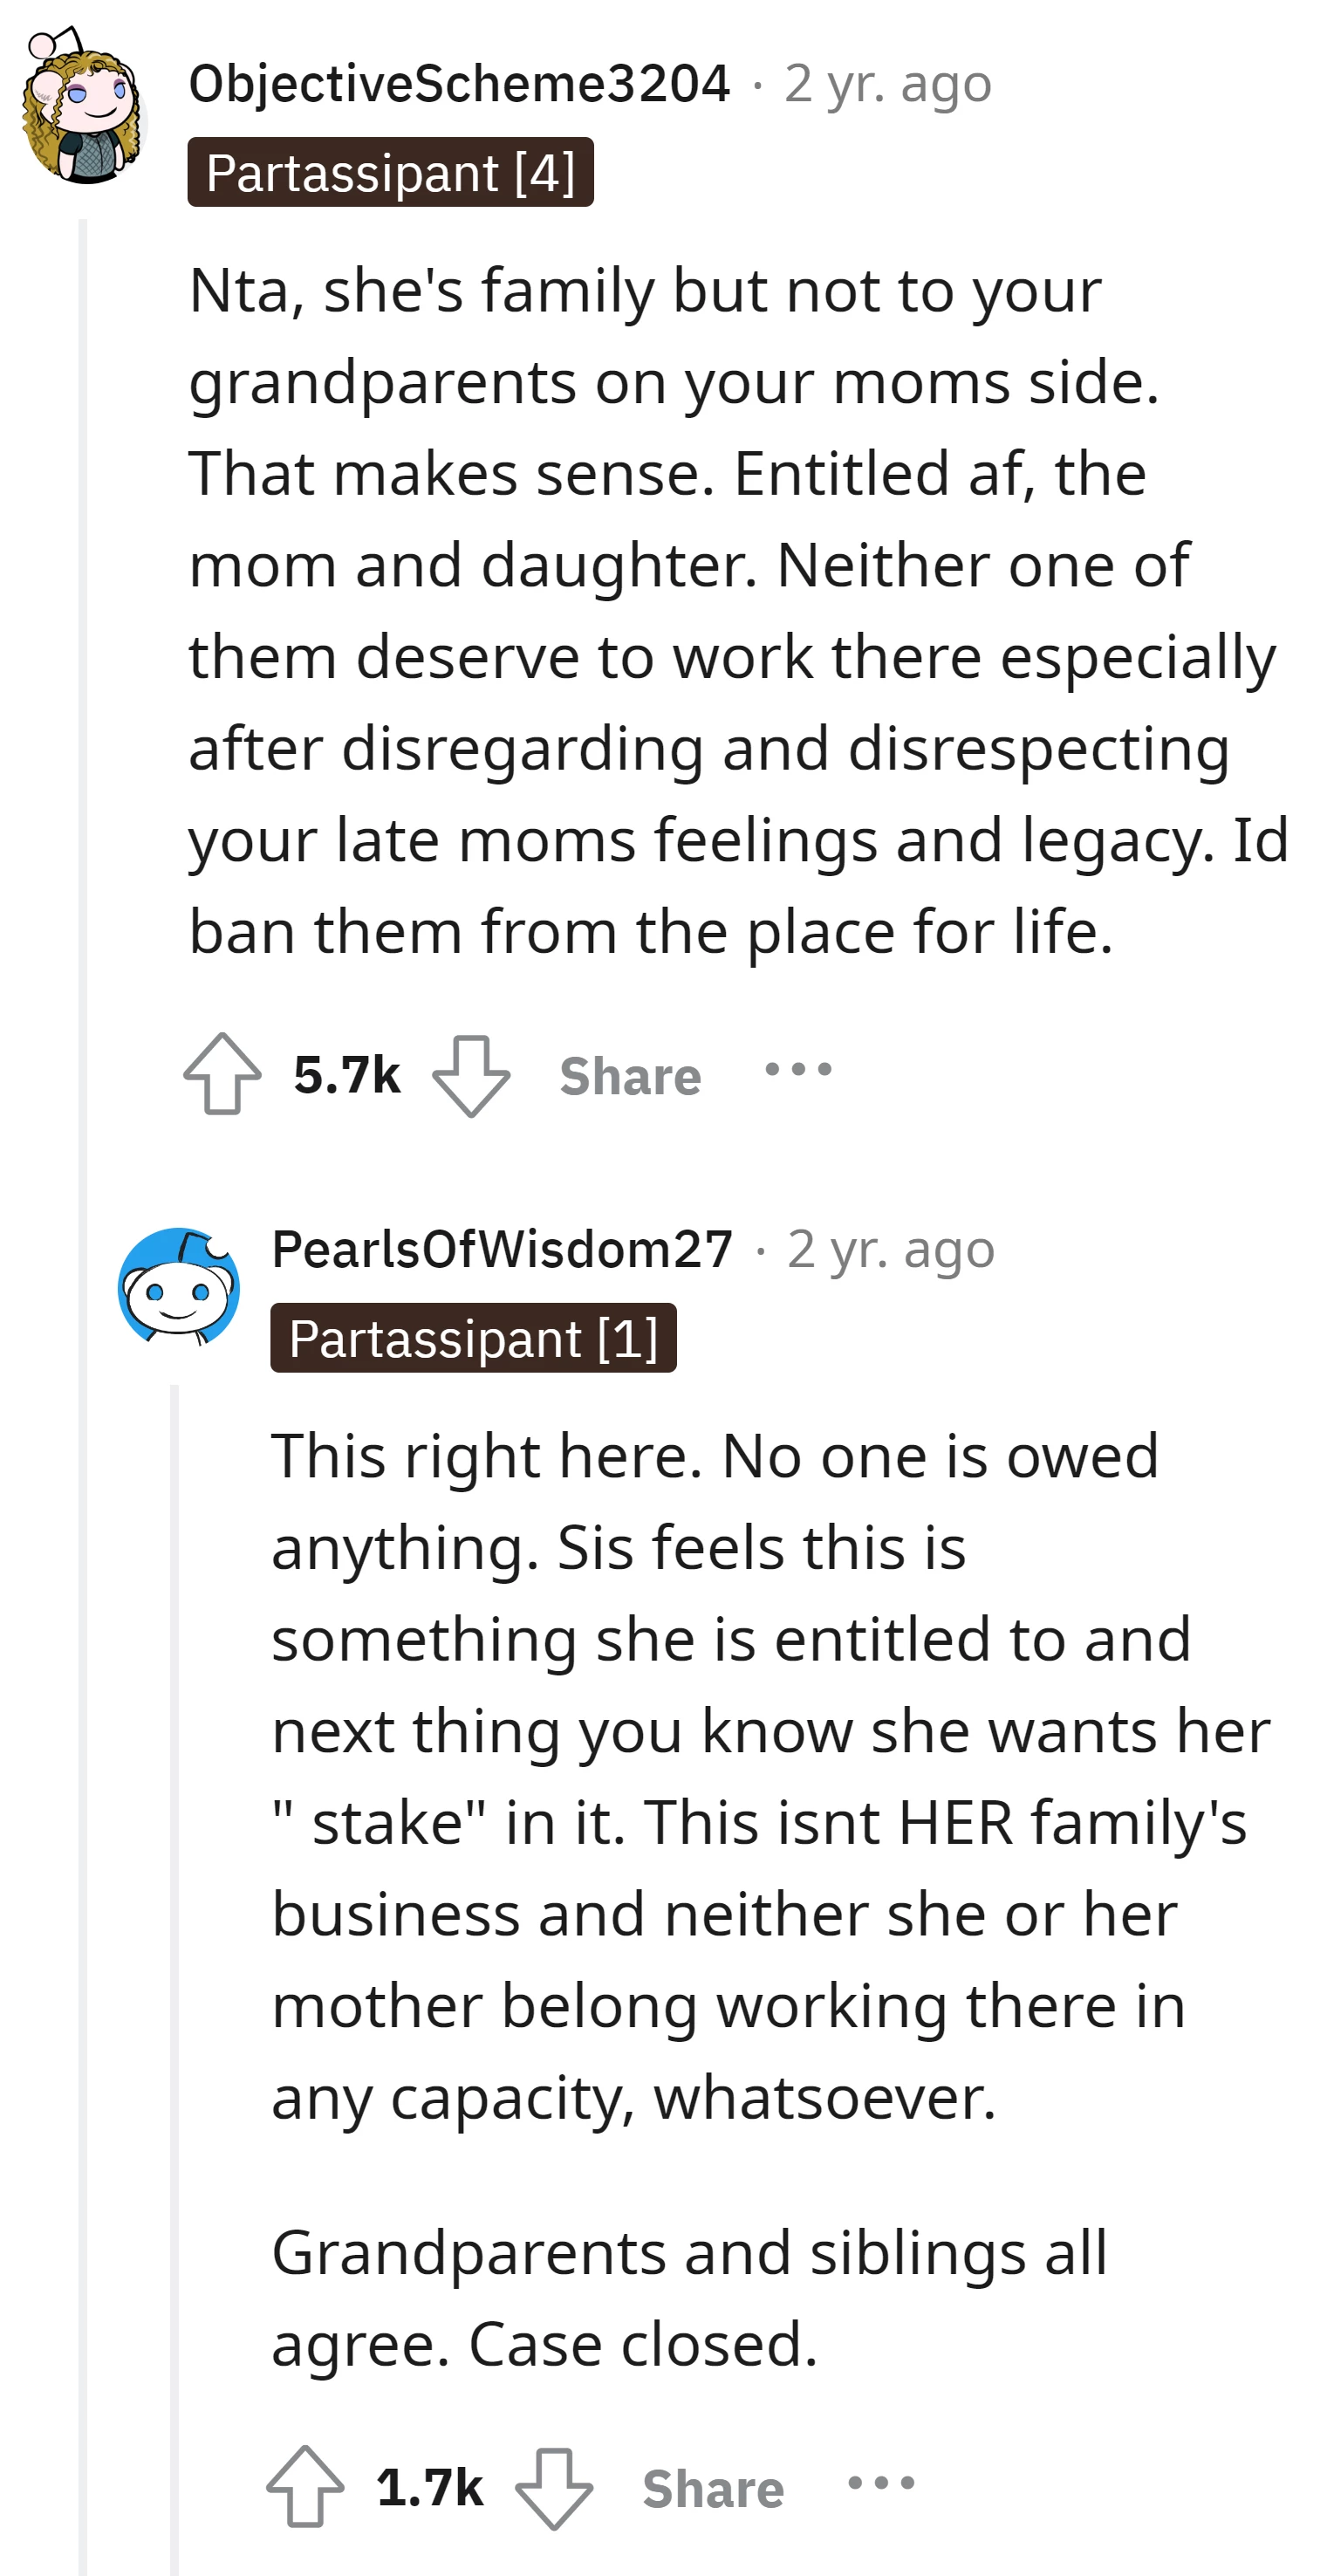 The half sister and her mother entitled and disrespectful to their late mom's legacy